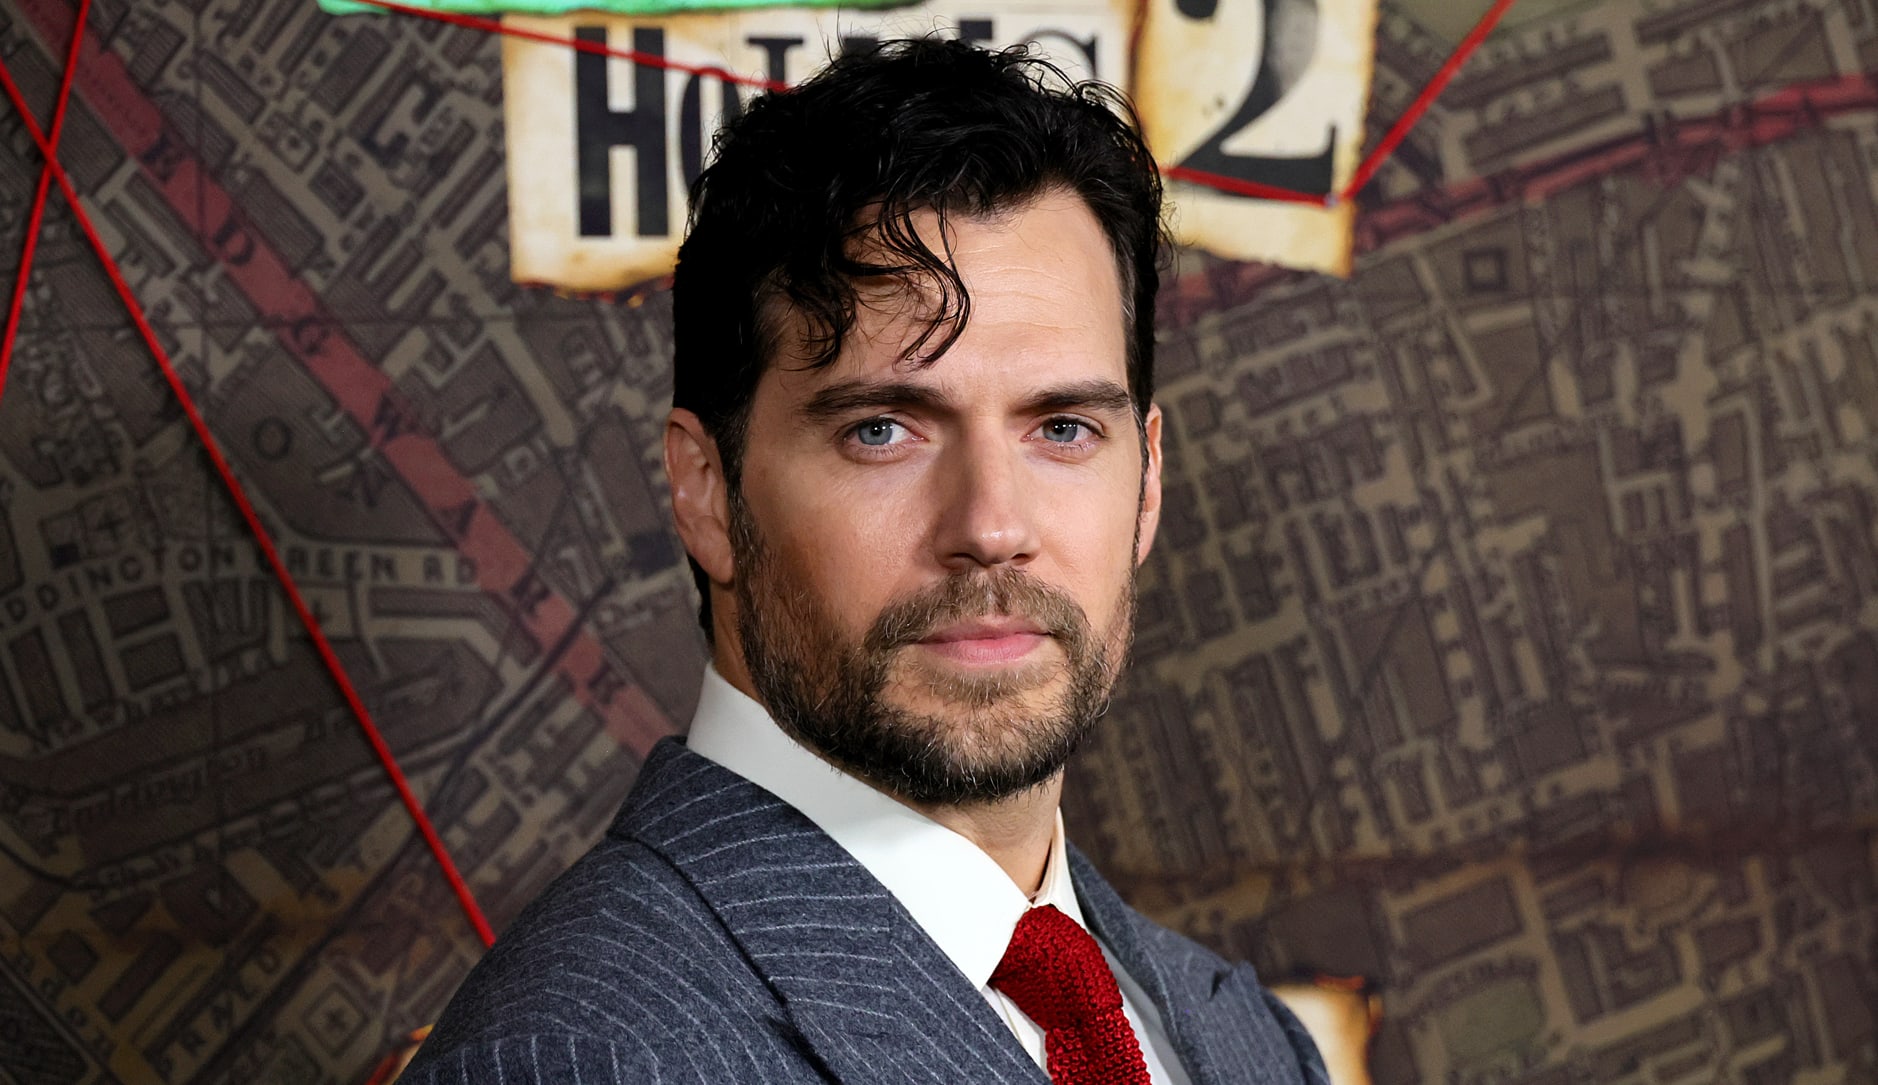 Henry Cavill to Star in and Executive Produce 'Warhammer 40,000